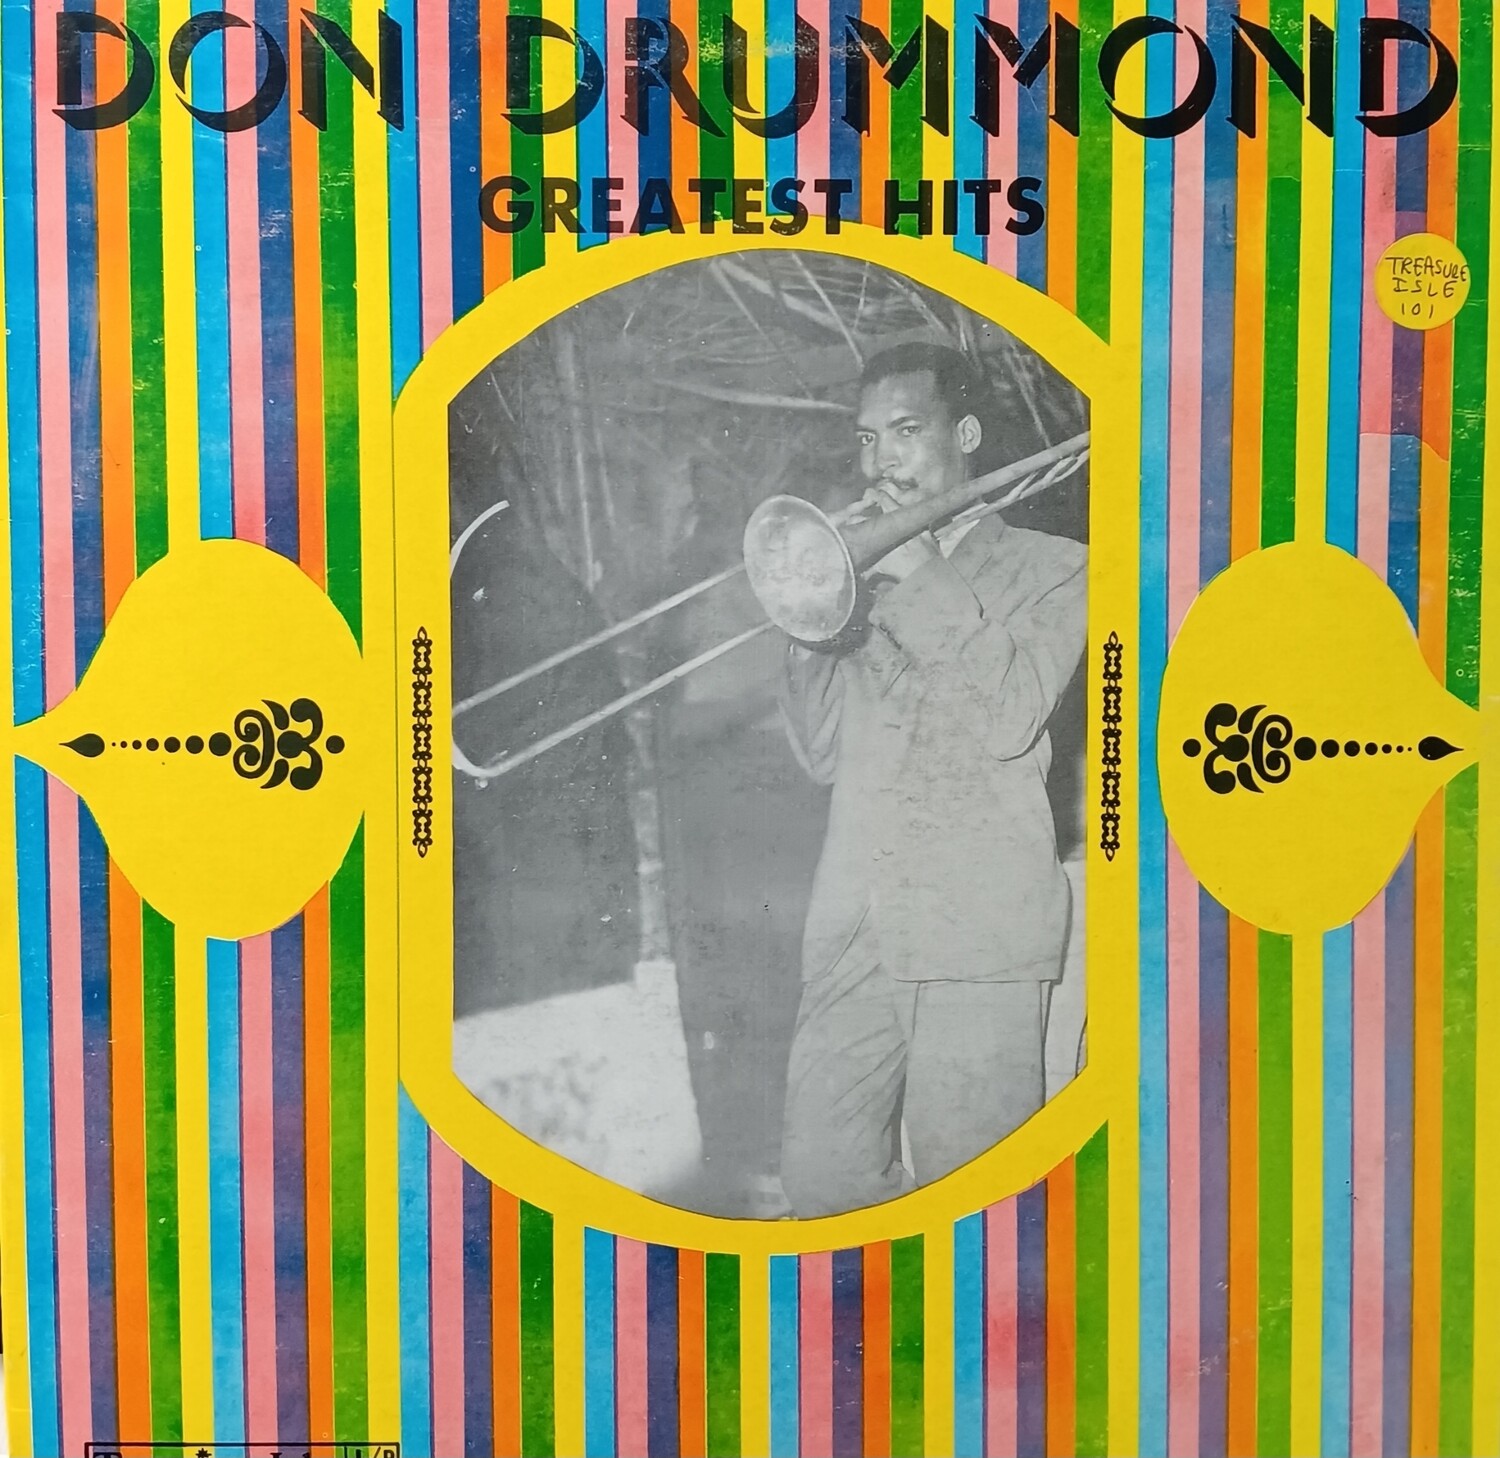 Don Drummond - Greatest Hits